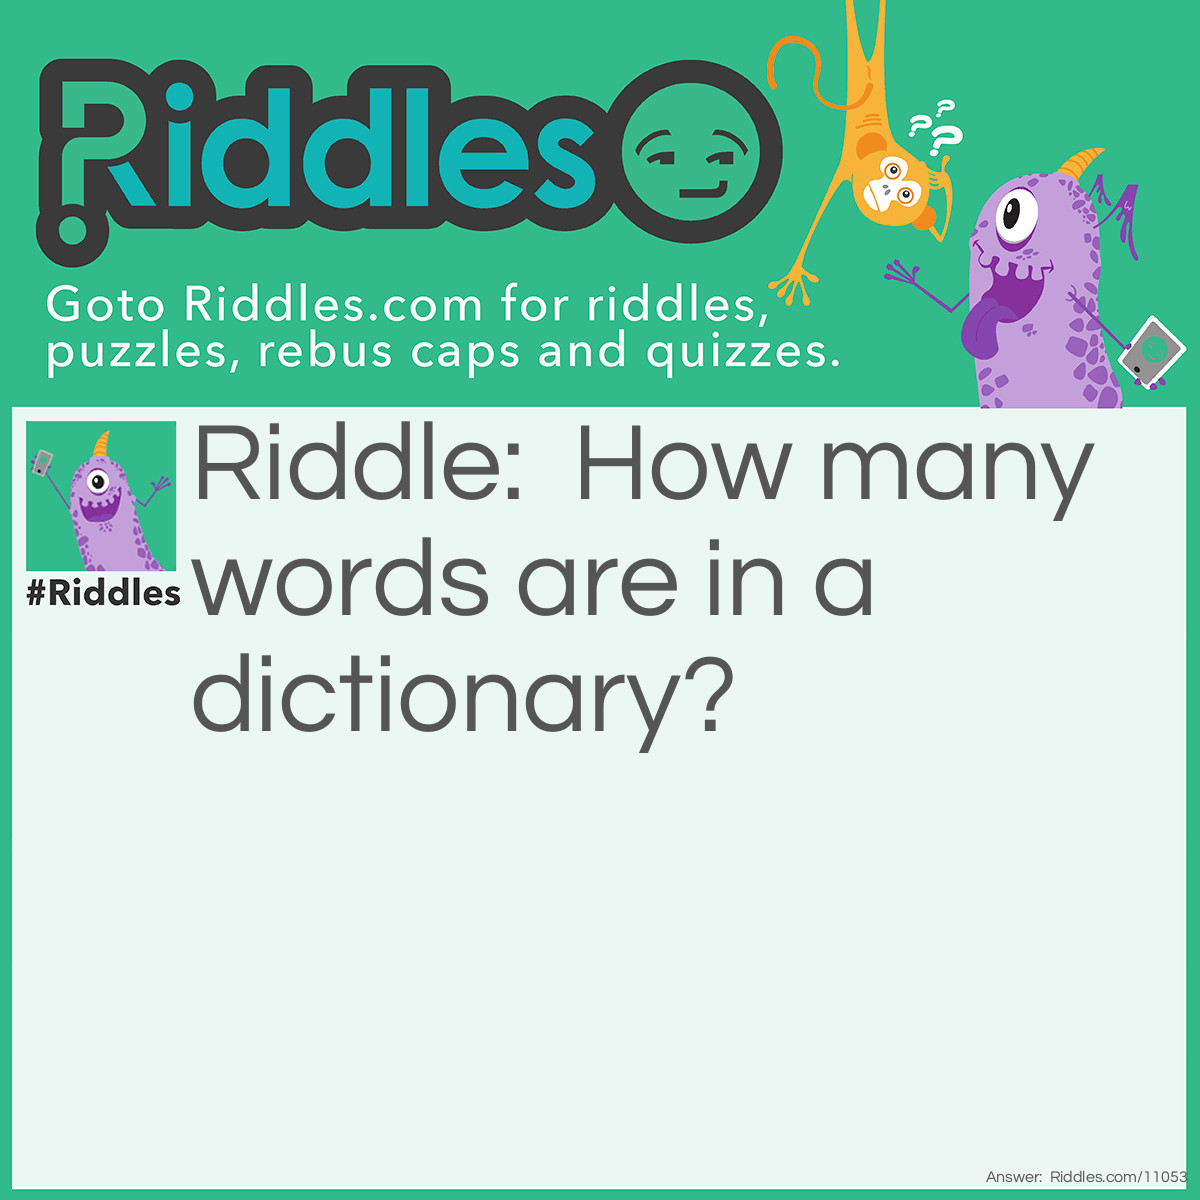 Riddle: How many words are in a dictionary? Answer: 2, 'a dictionary'.